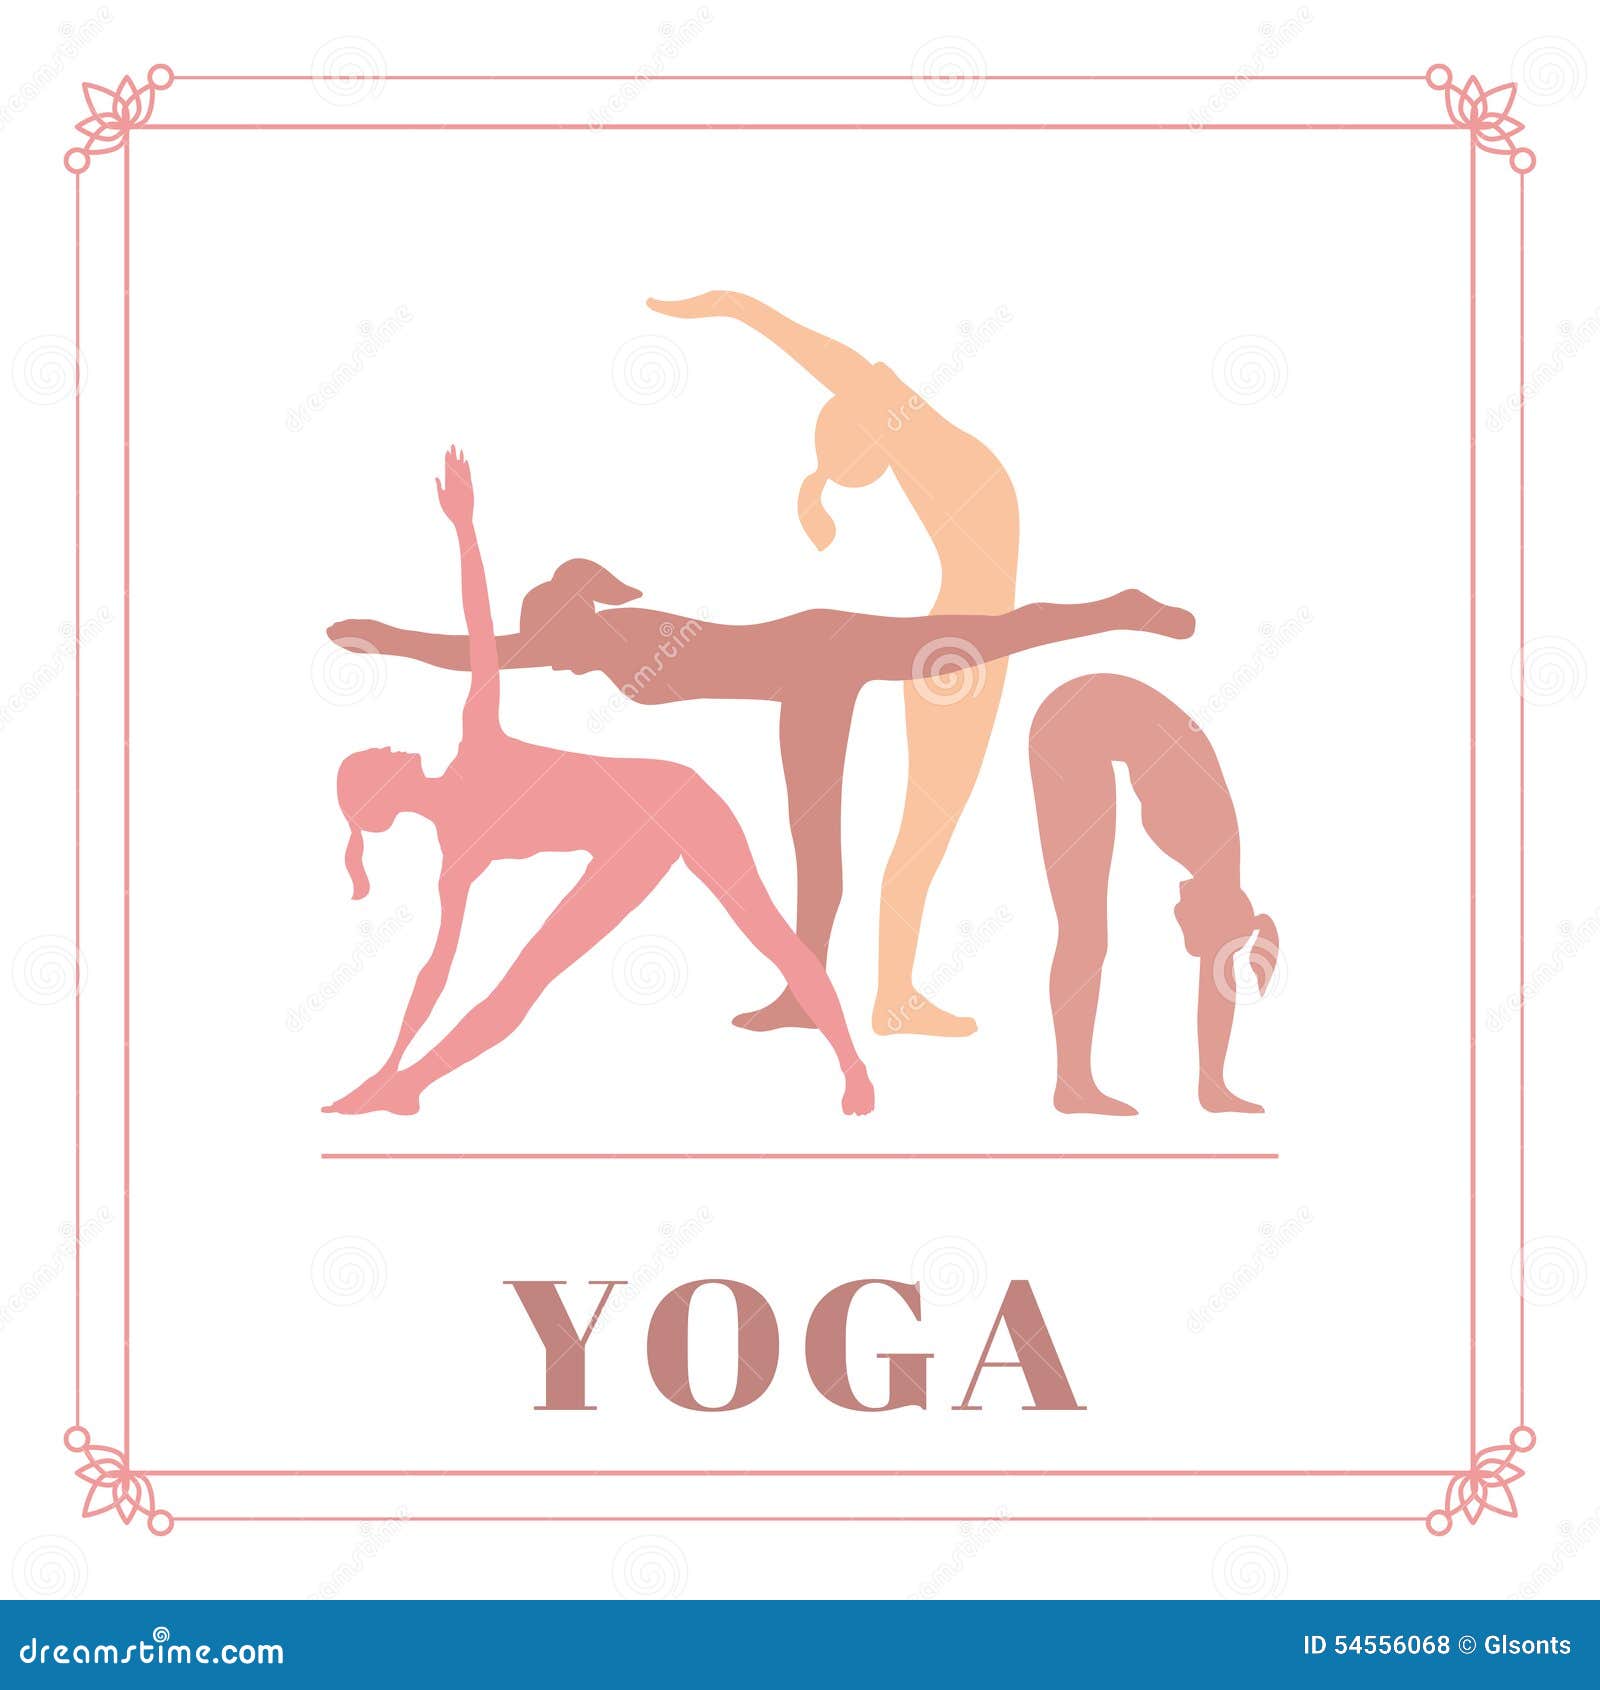 Buy Yoga Pose Exercise Poster Laminated - Premium Instructional Beginner's  Chart for Sequences & Flow - 70 Essential Poses - Sanskrit & English Names  - Easy, View It & Do It! -